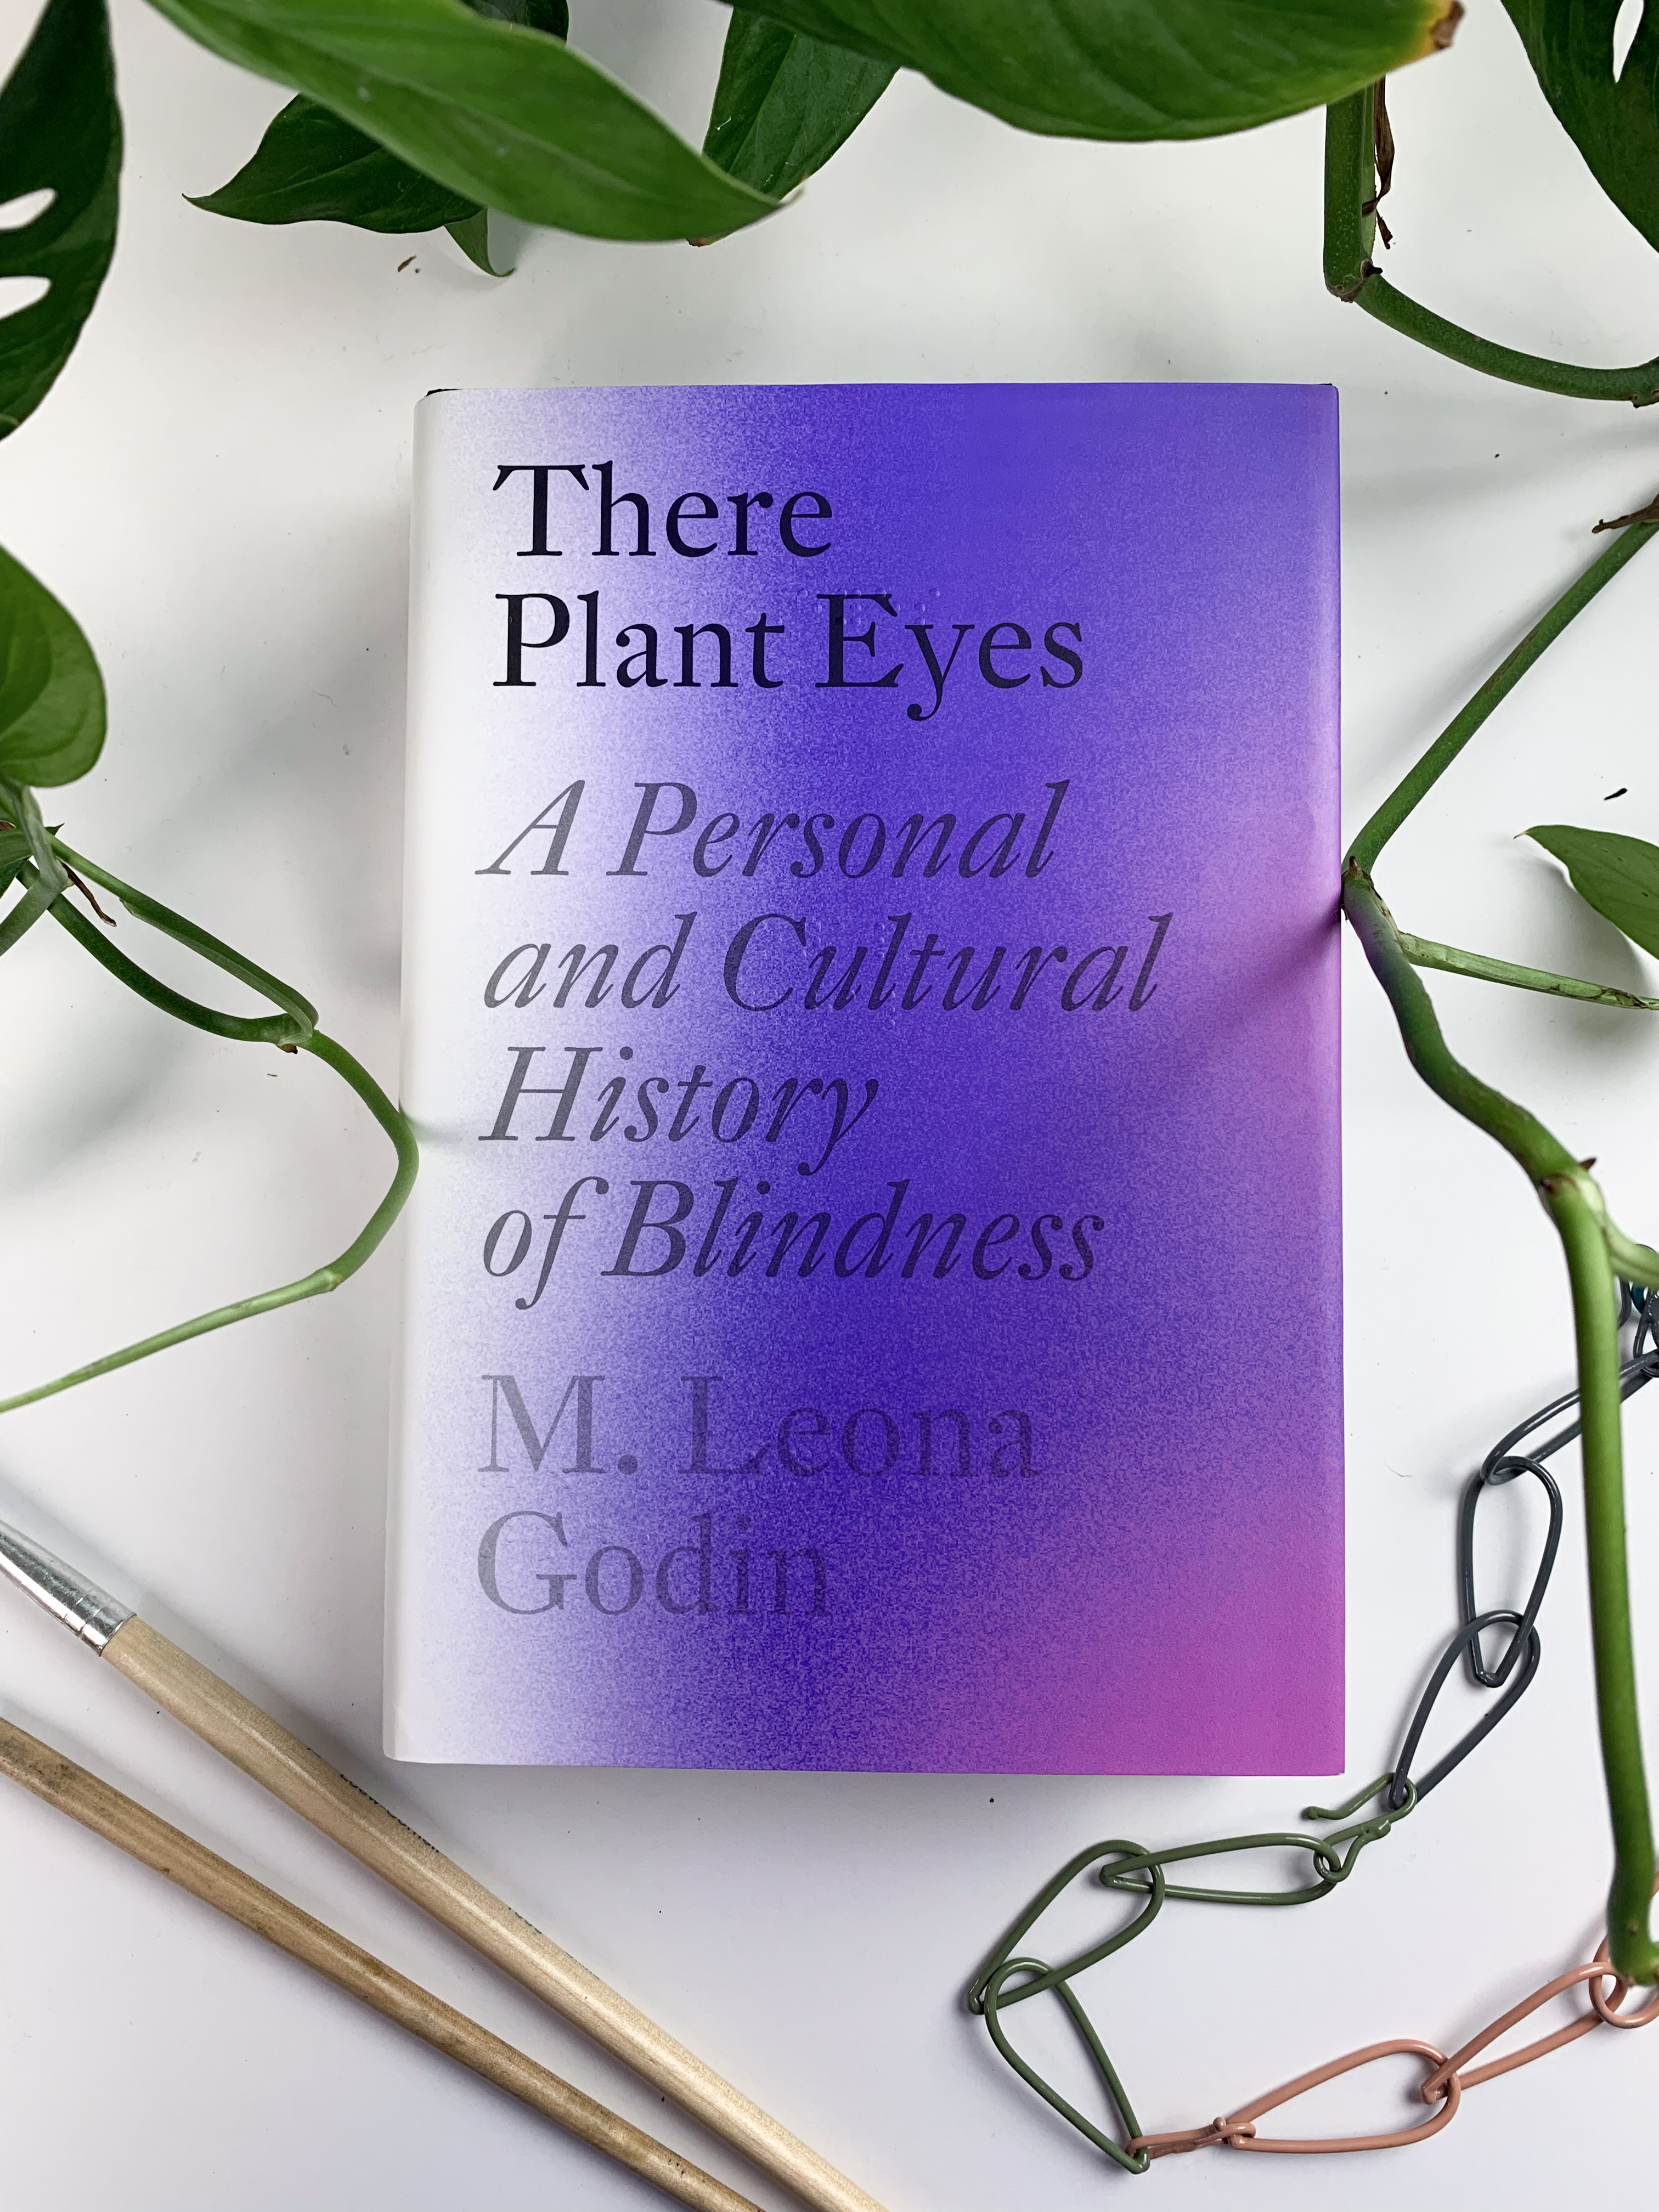 review of There Plant Eyes: A Personal and Cultural History of Blindness by M. Leona Godin